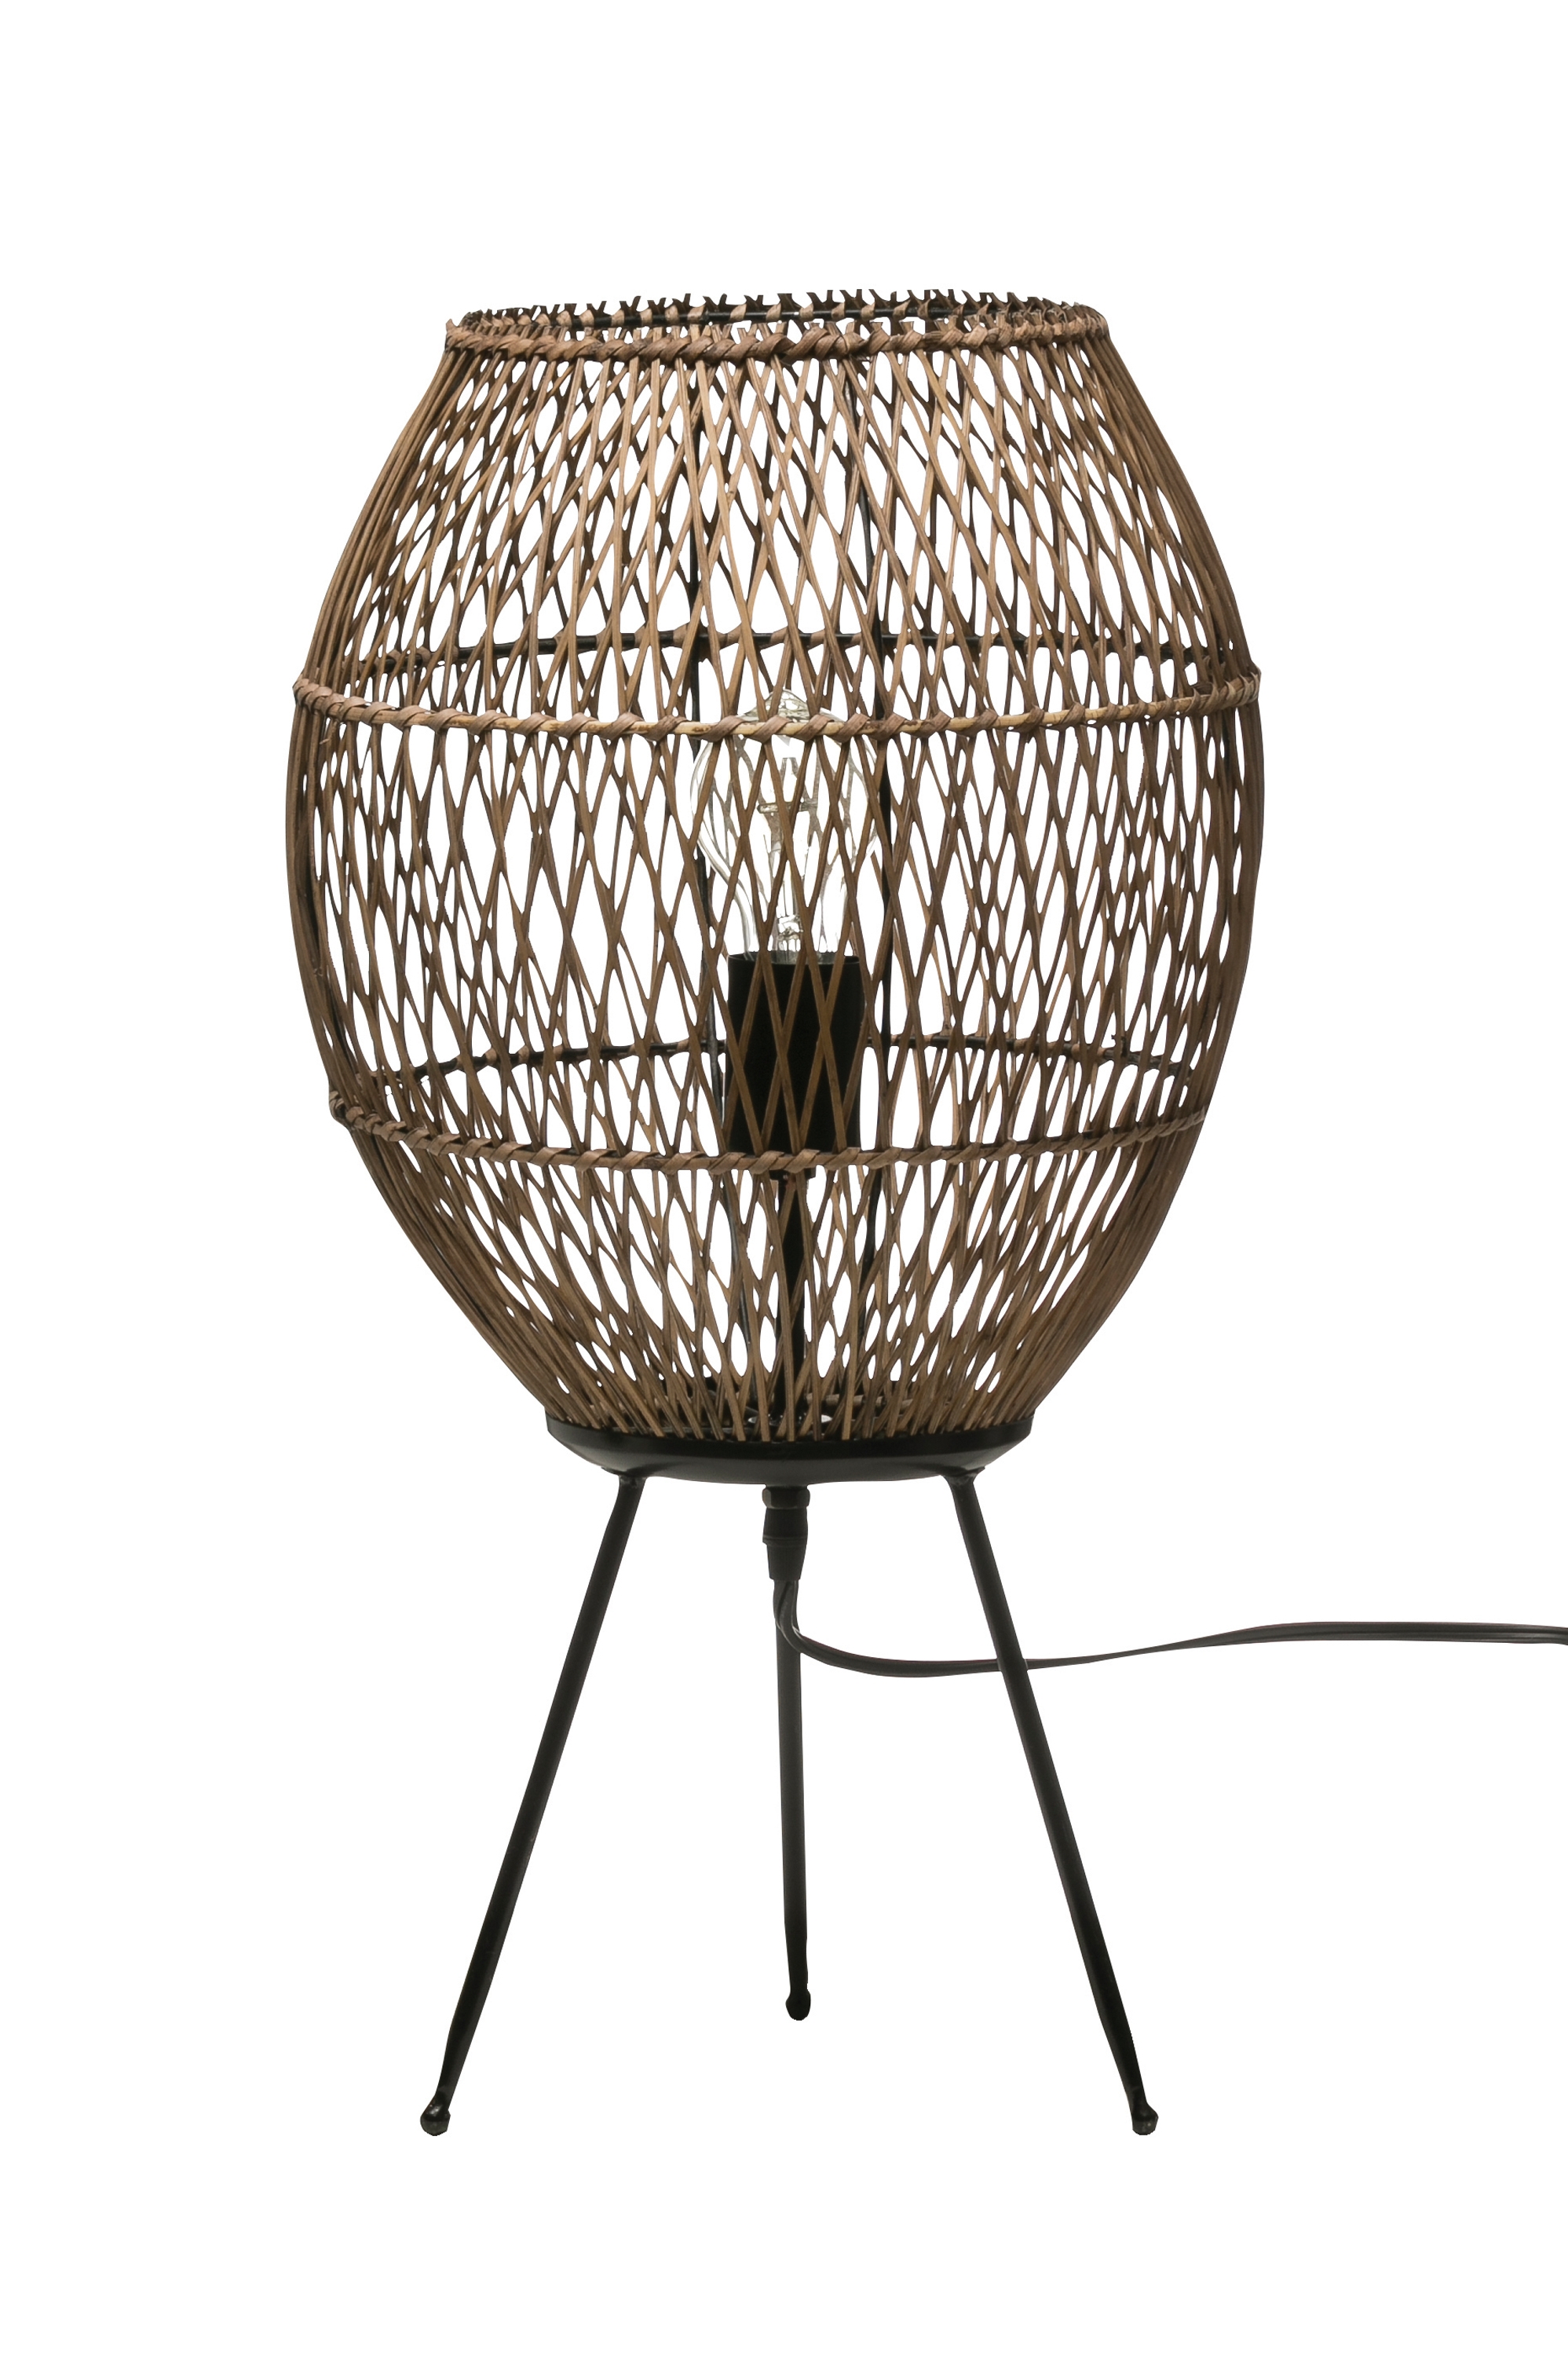 21.75"H Handwoven Bamboo & Rattan Table Lamp with Metal Tripod Legs & Inline Switch - Image 0